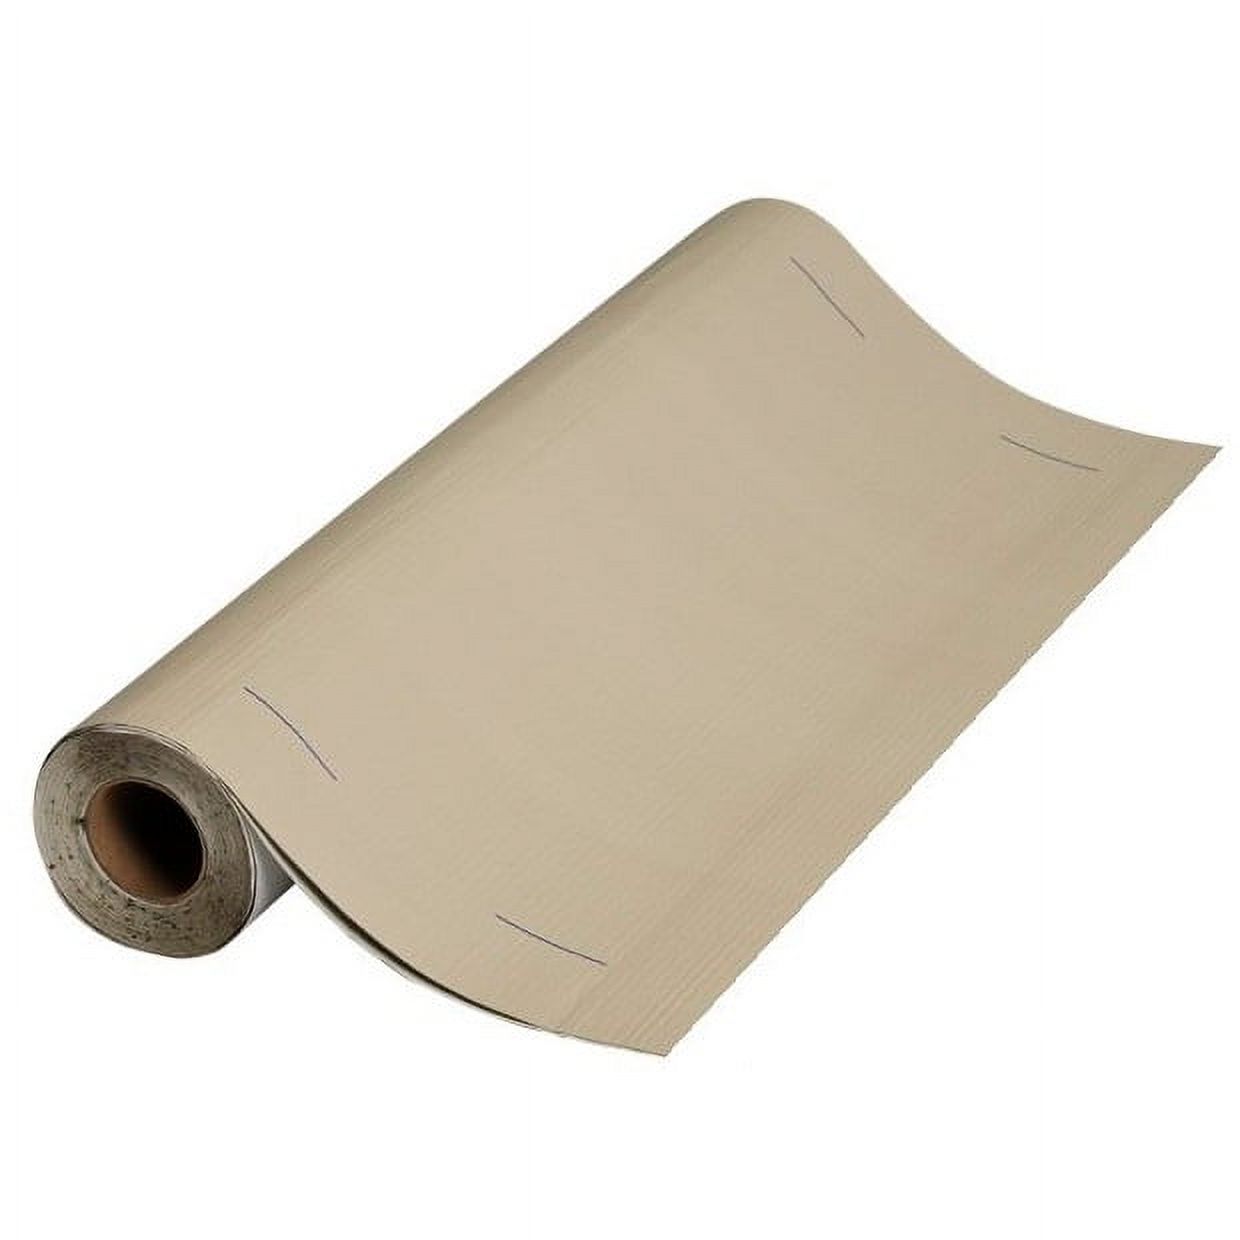 MFM Peel & Seal Self Stick Roll Roofing - image 1 of 2